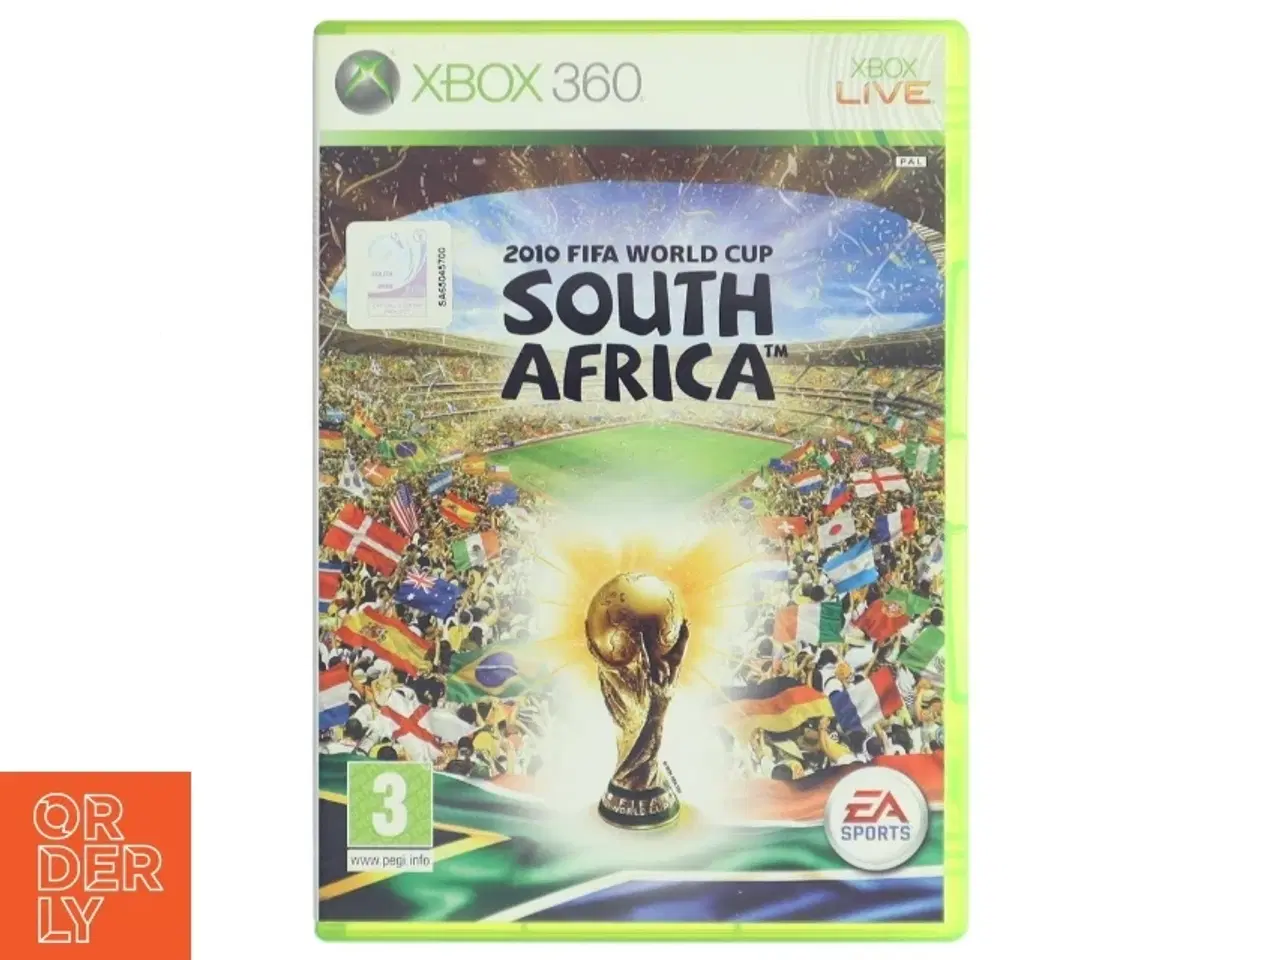 Billede 1 - 2010 FIFA World Cup South Africa Xbox 360 fra EA Sports